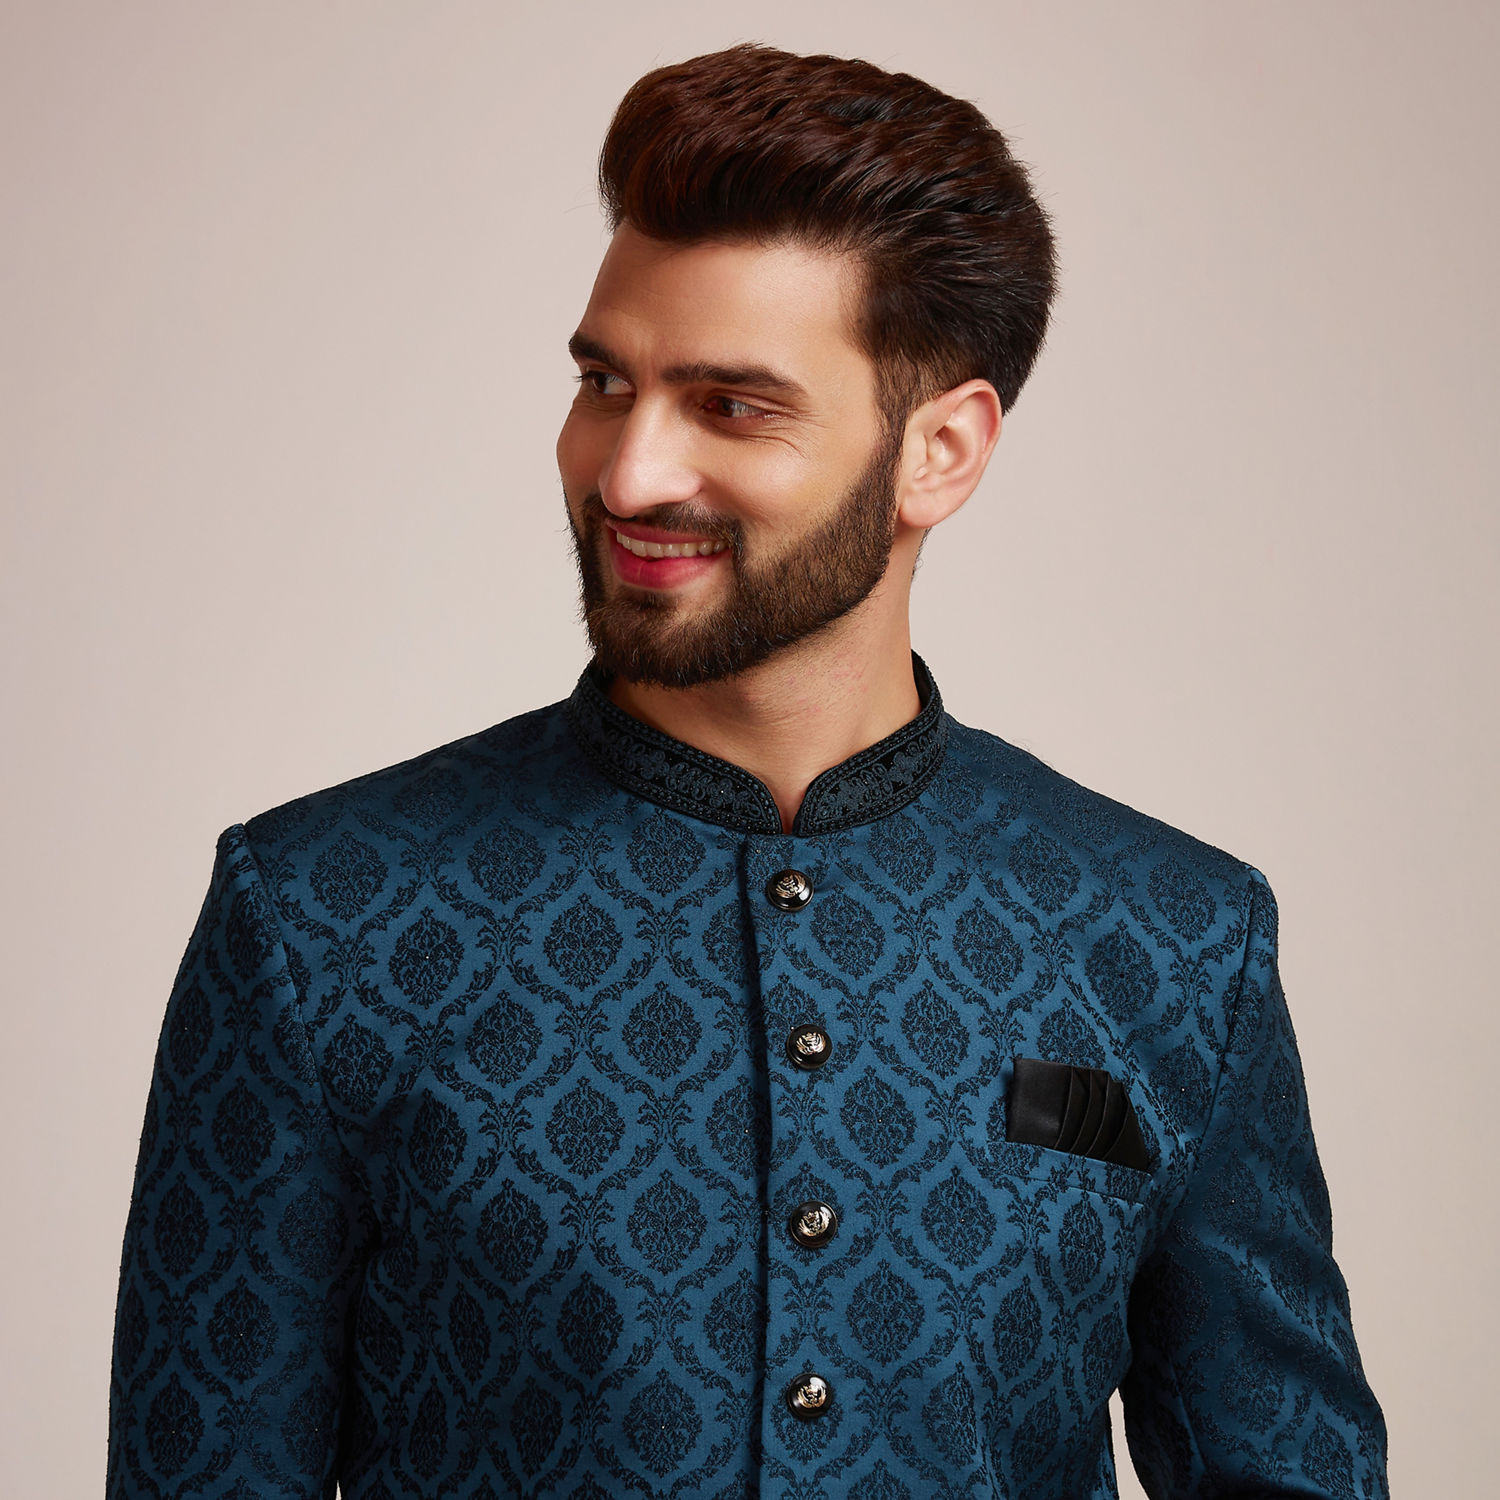 Manyavar - The best part about having the right outfit is that it